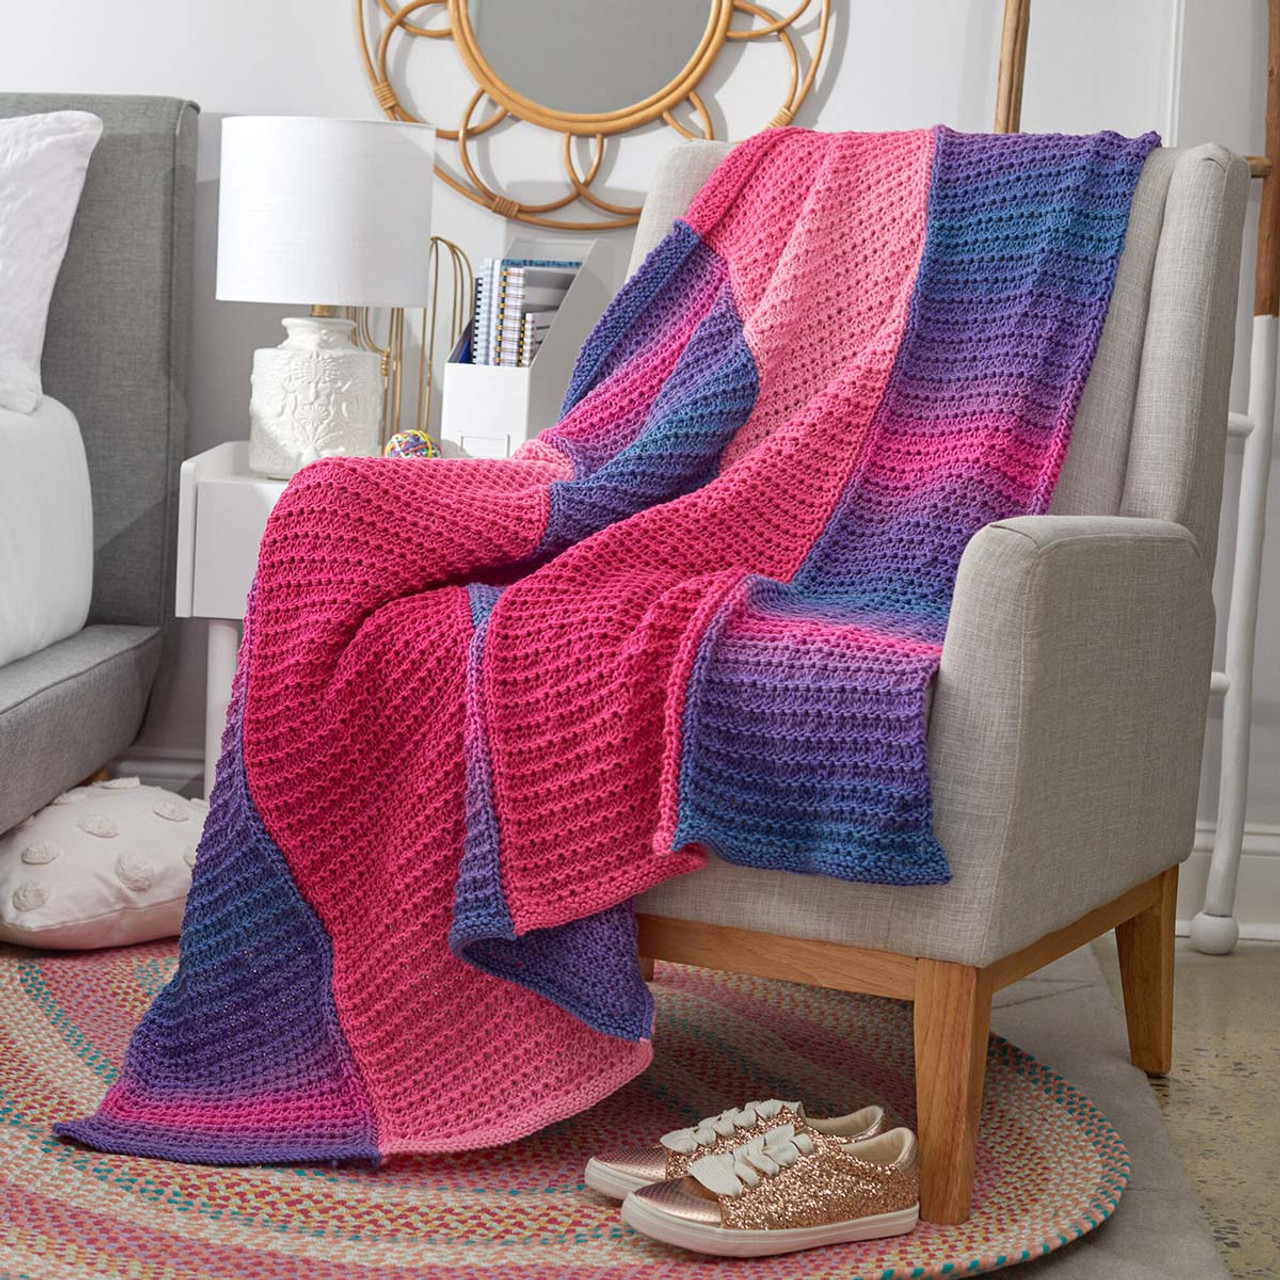 Red Heart Corner-to-Corner Ombre Throw Pattern